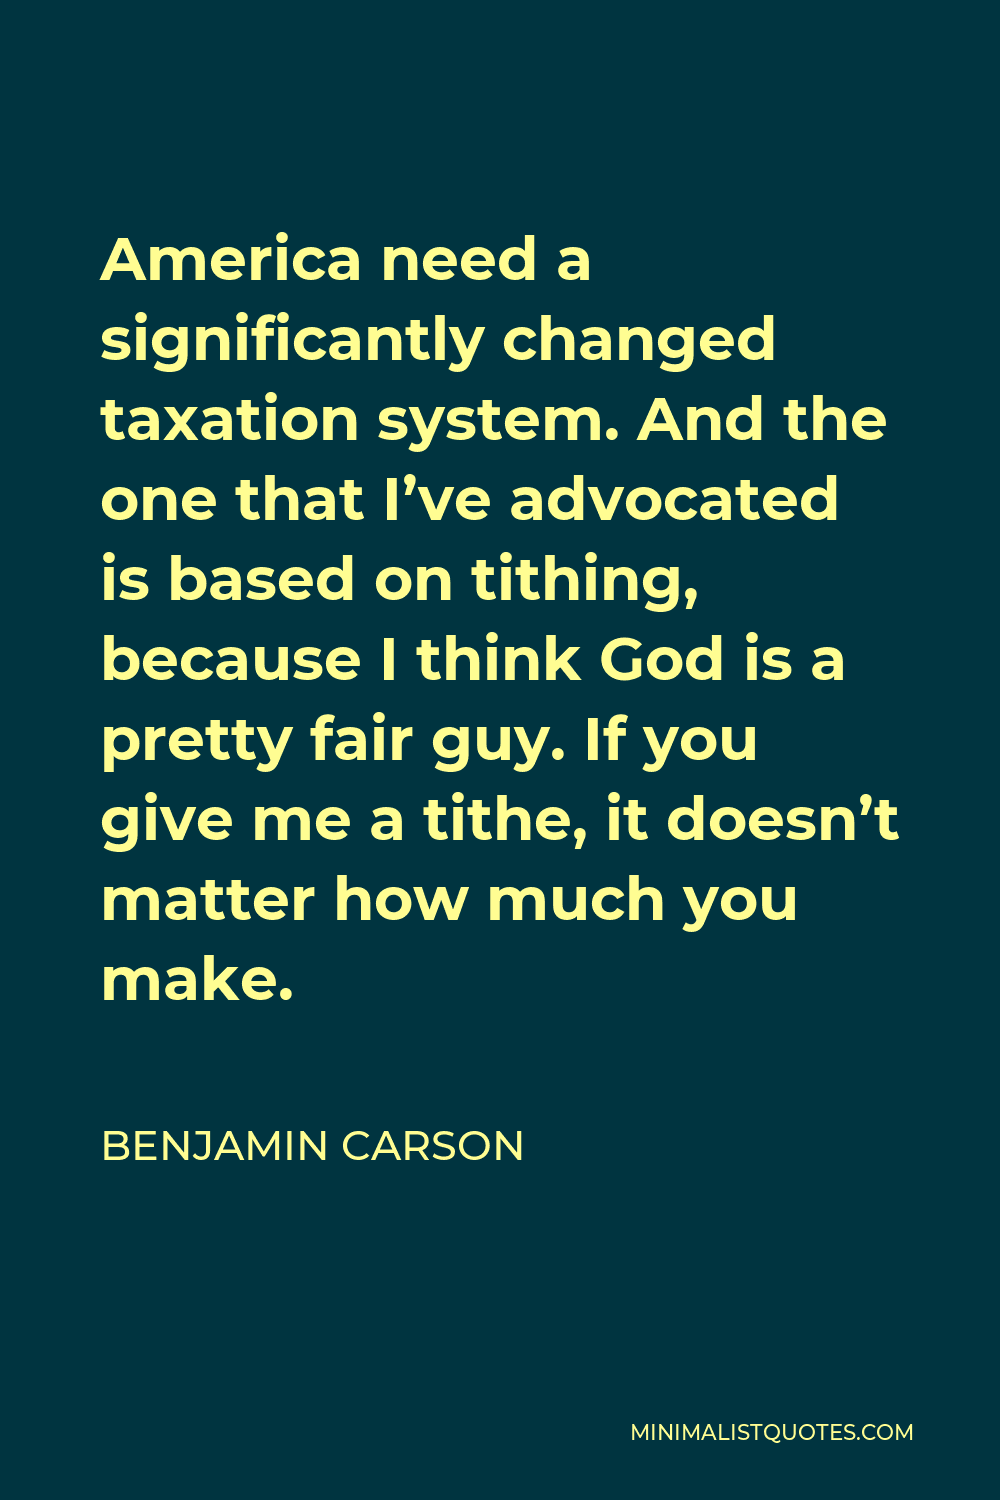 Benjamin Carson Quote - America need a significantly changed taxation system. And the one that I’ve advocated is based on tithing, because I think God is a pretty fair guy. If you give me a tithe, it doesn’t matter how much you make.